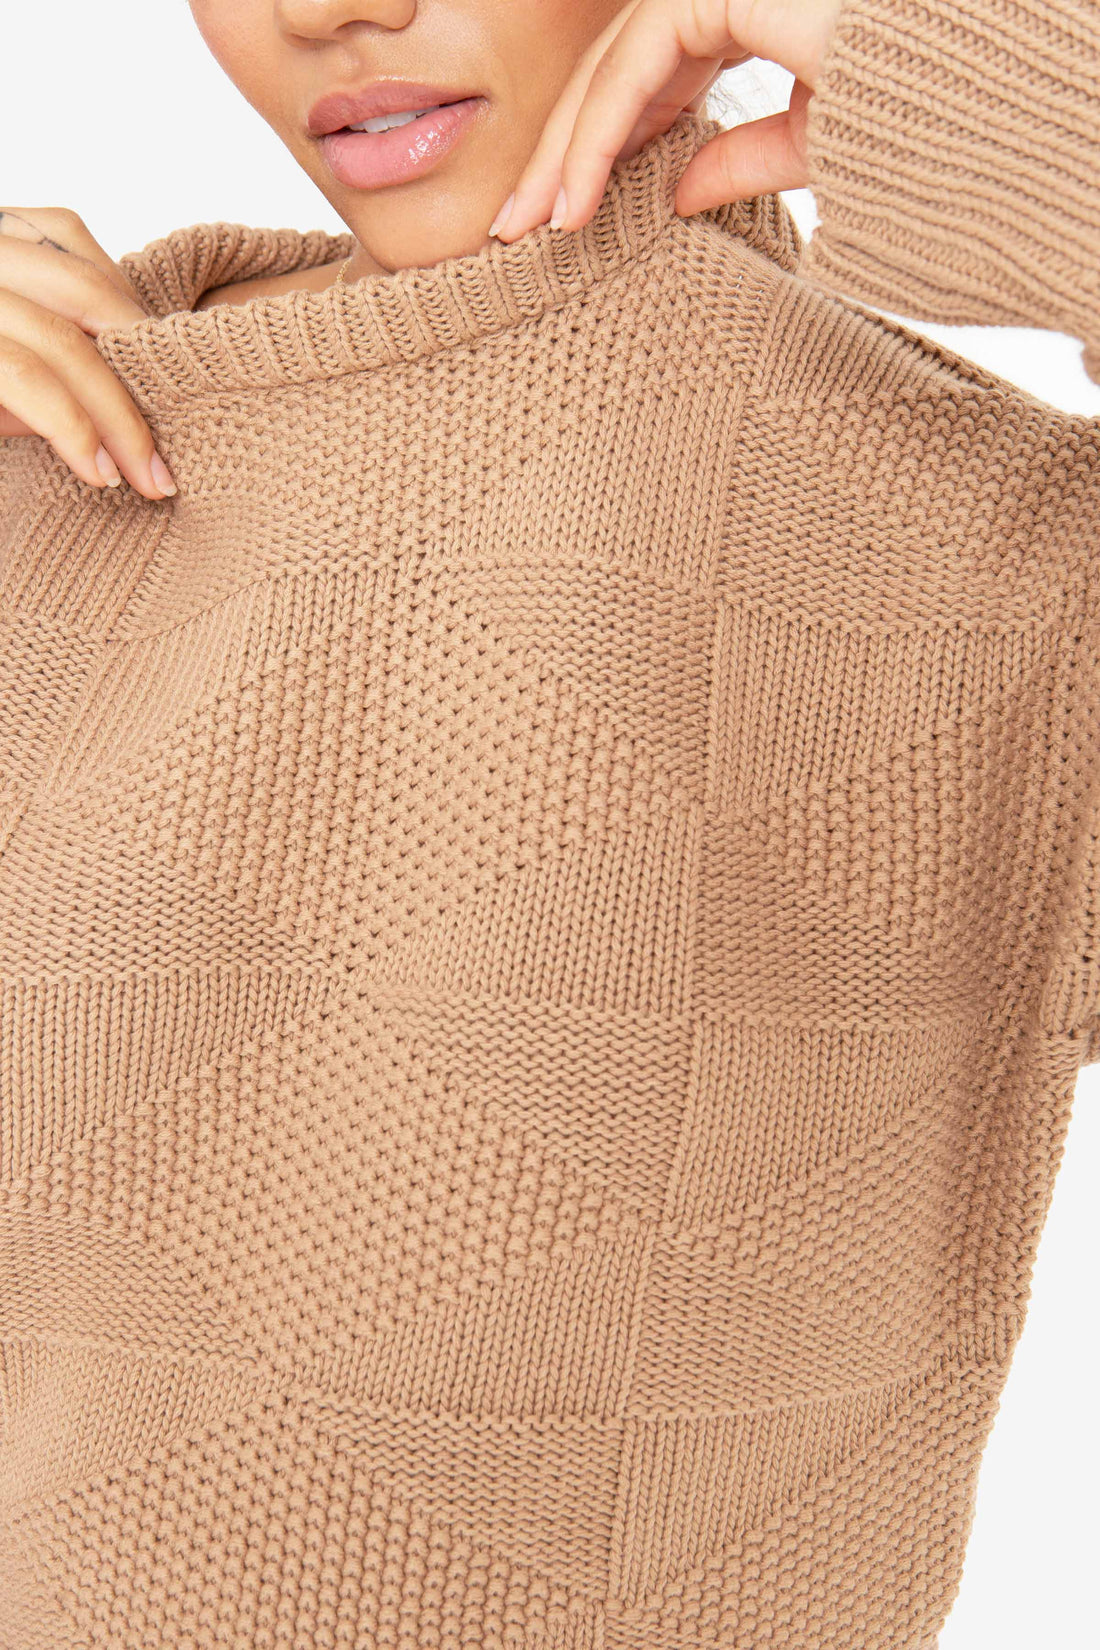 The Geo Knit - Camel